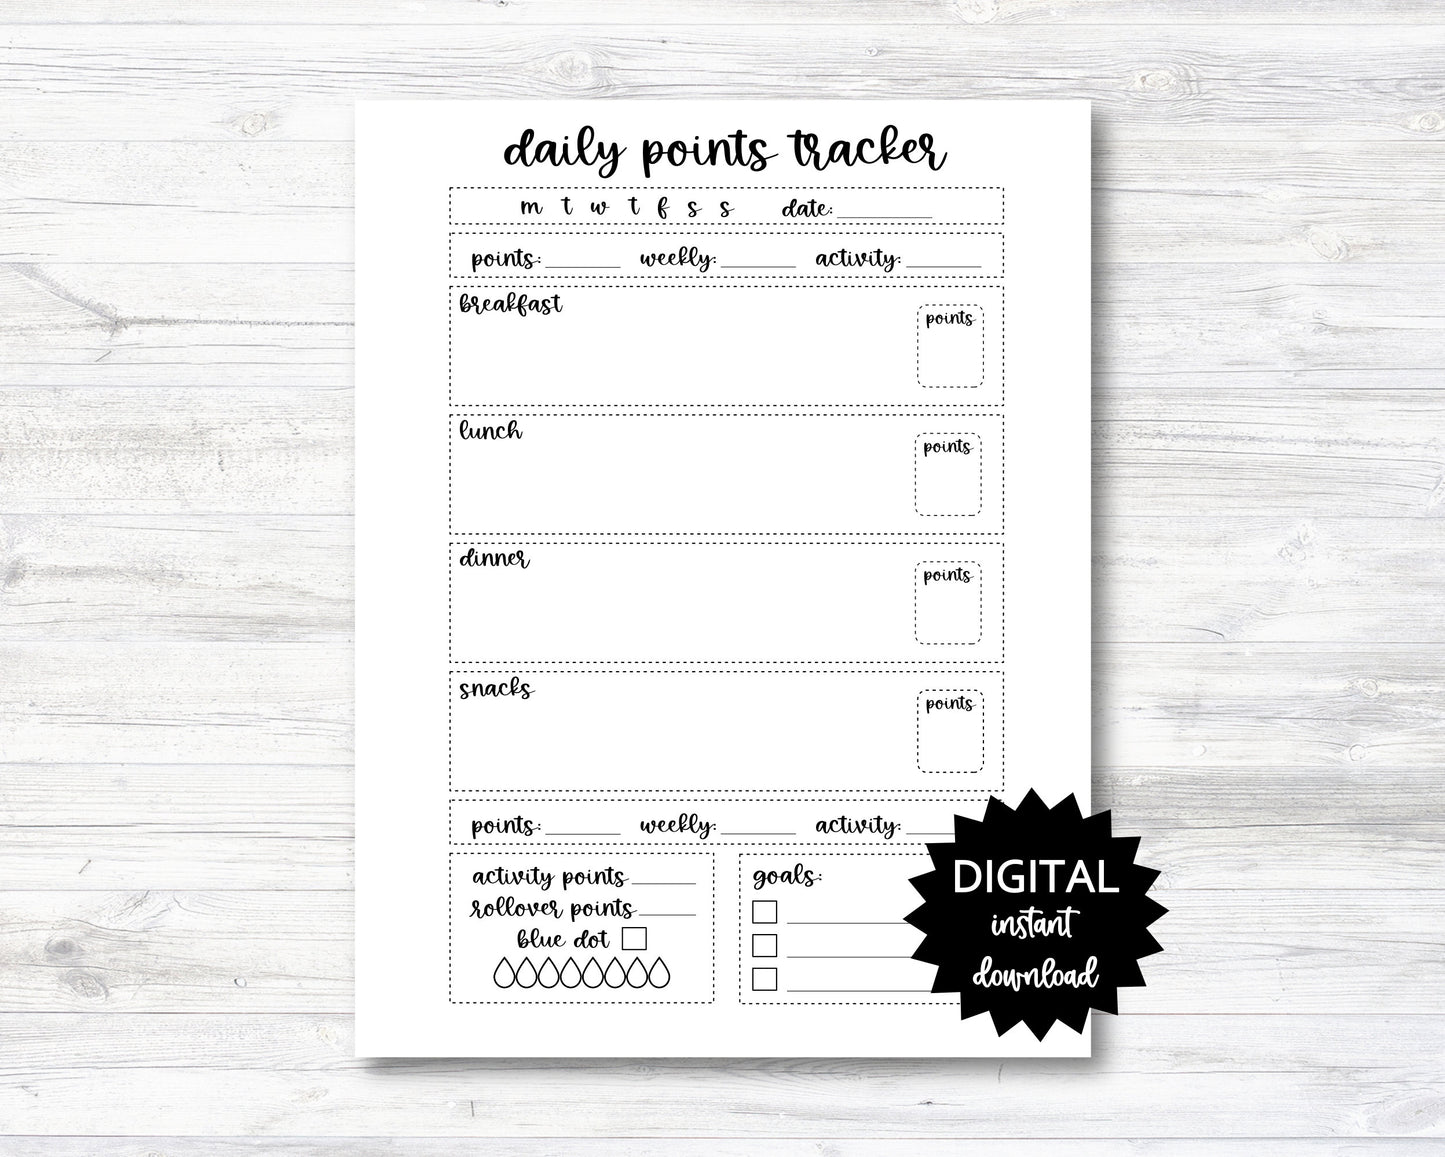 Daily Points Tracking Printable, Point Tracker Planner Page - PRINTABLE (N004_3)